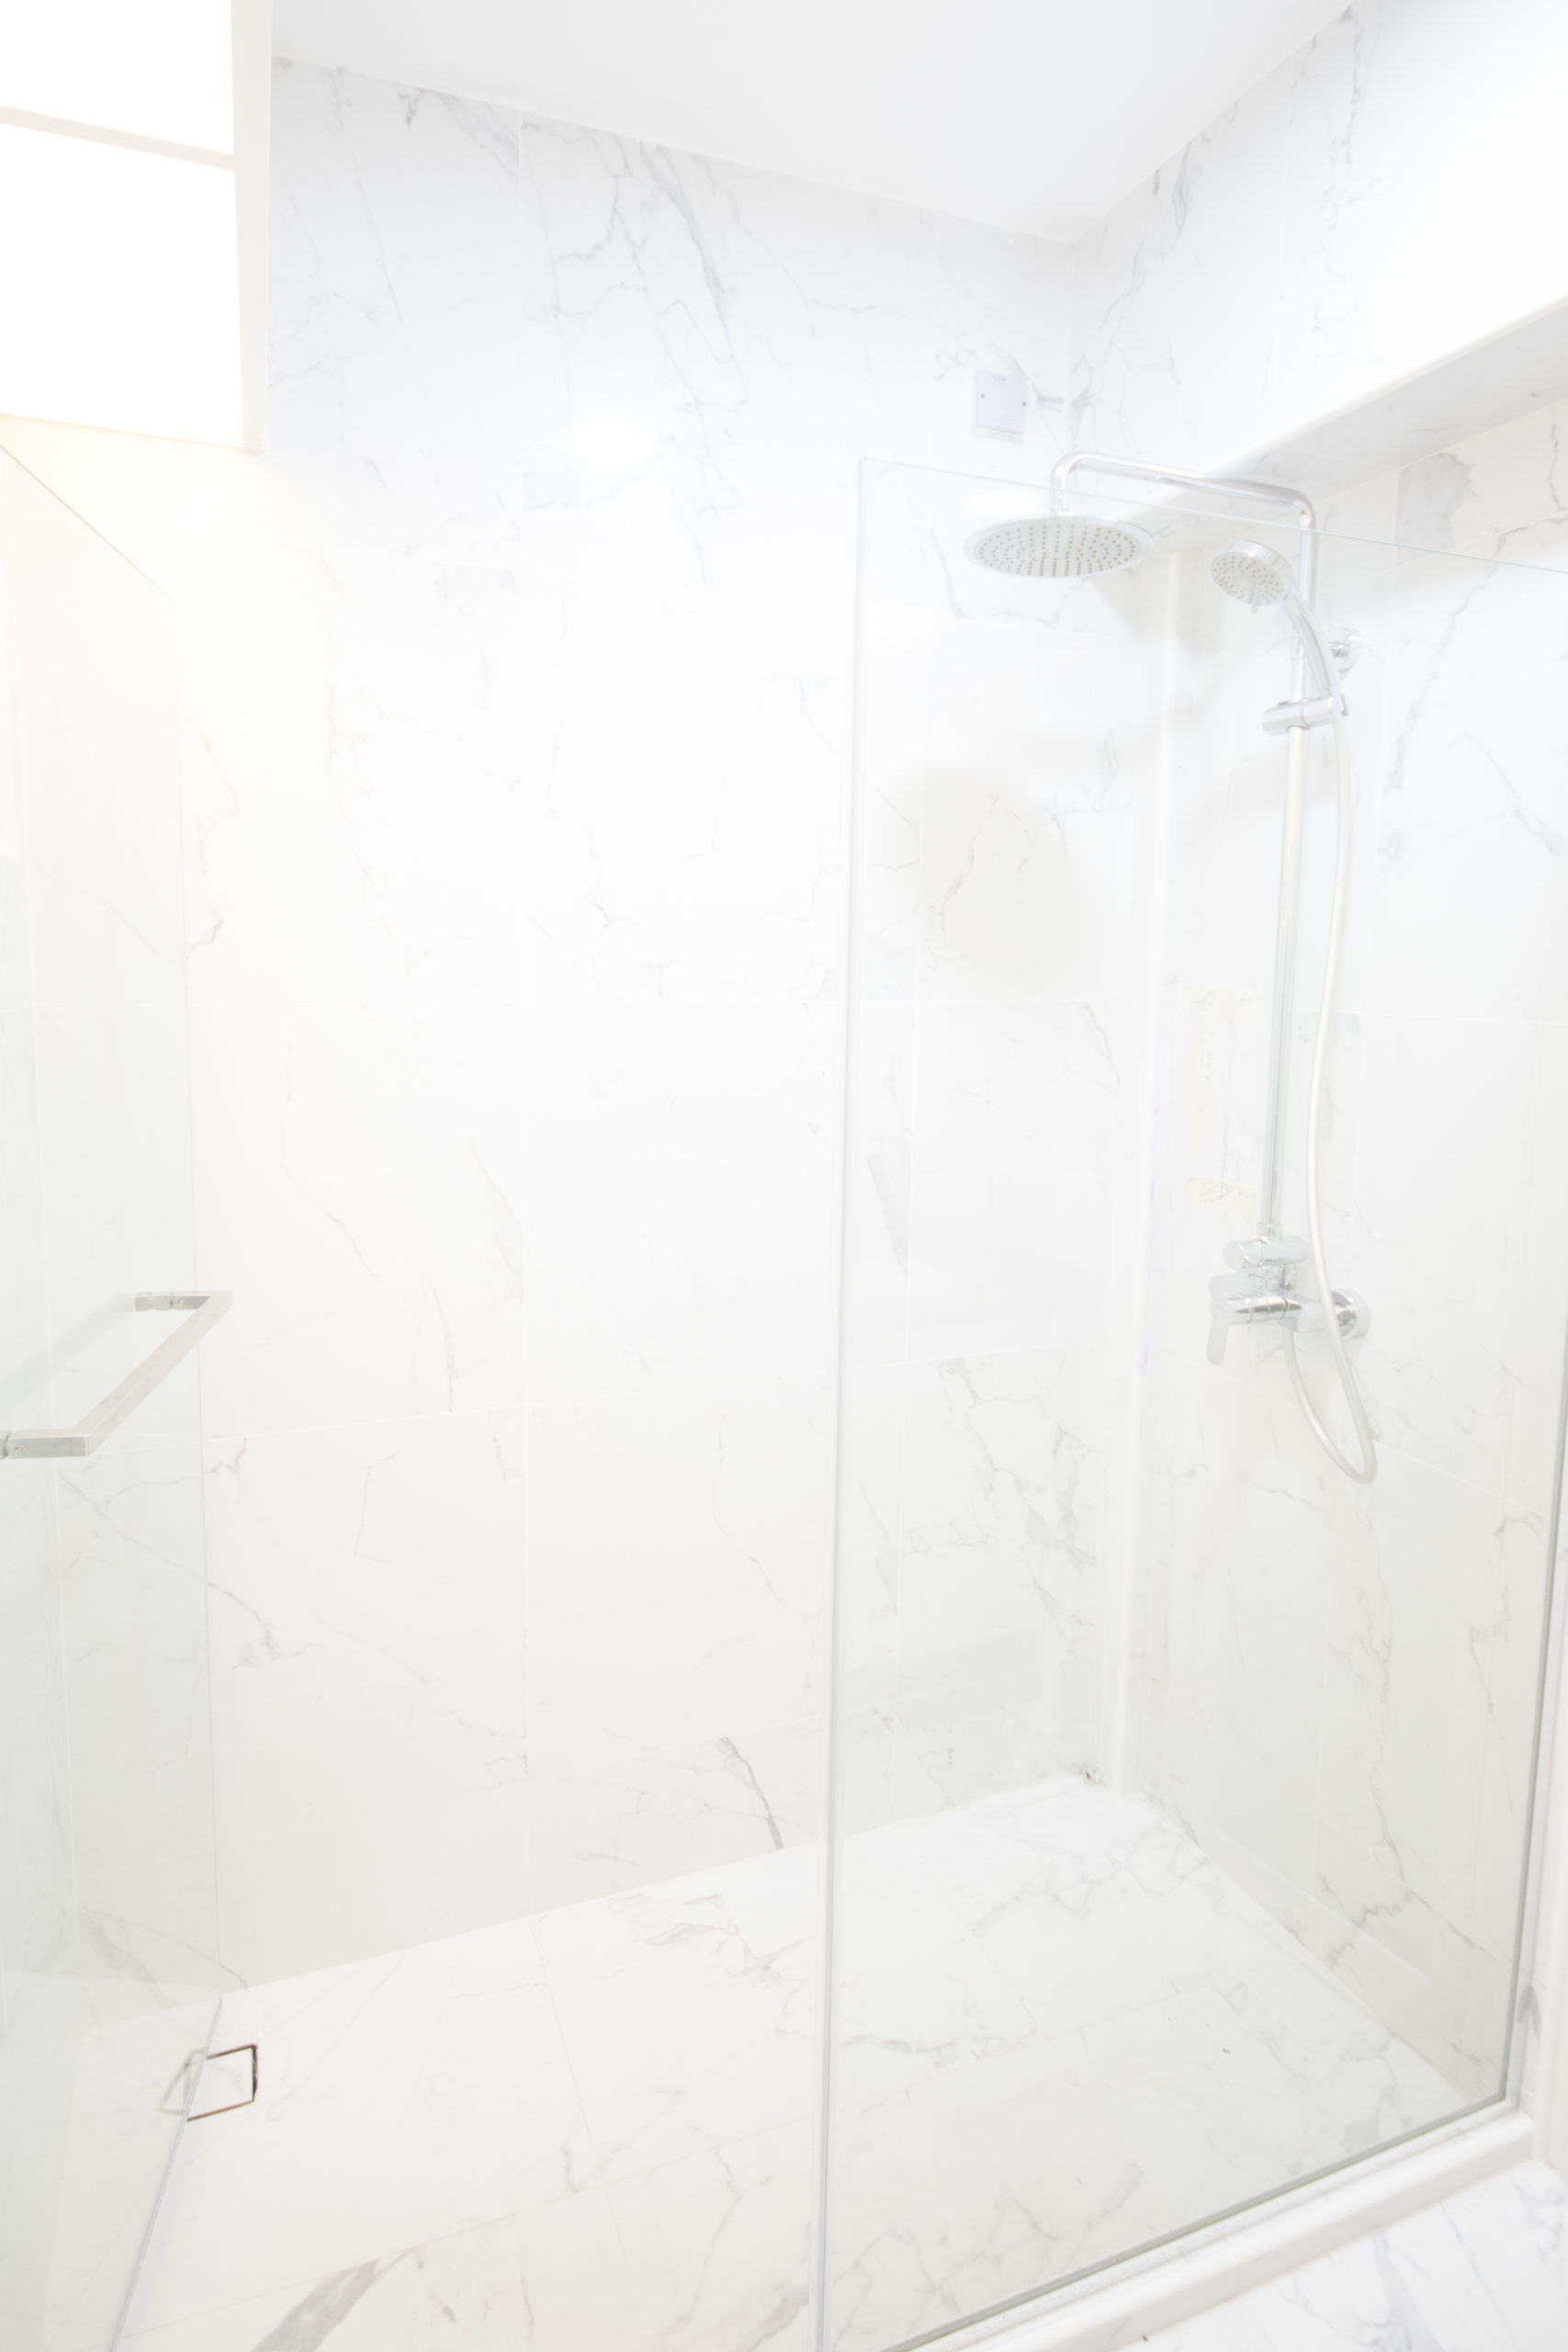 Singapore HDB All White Marble Shower Dry Toilet